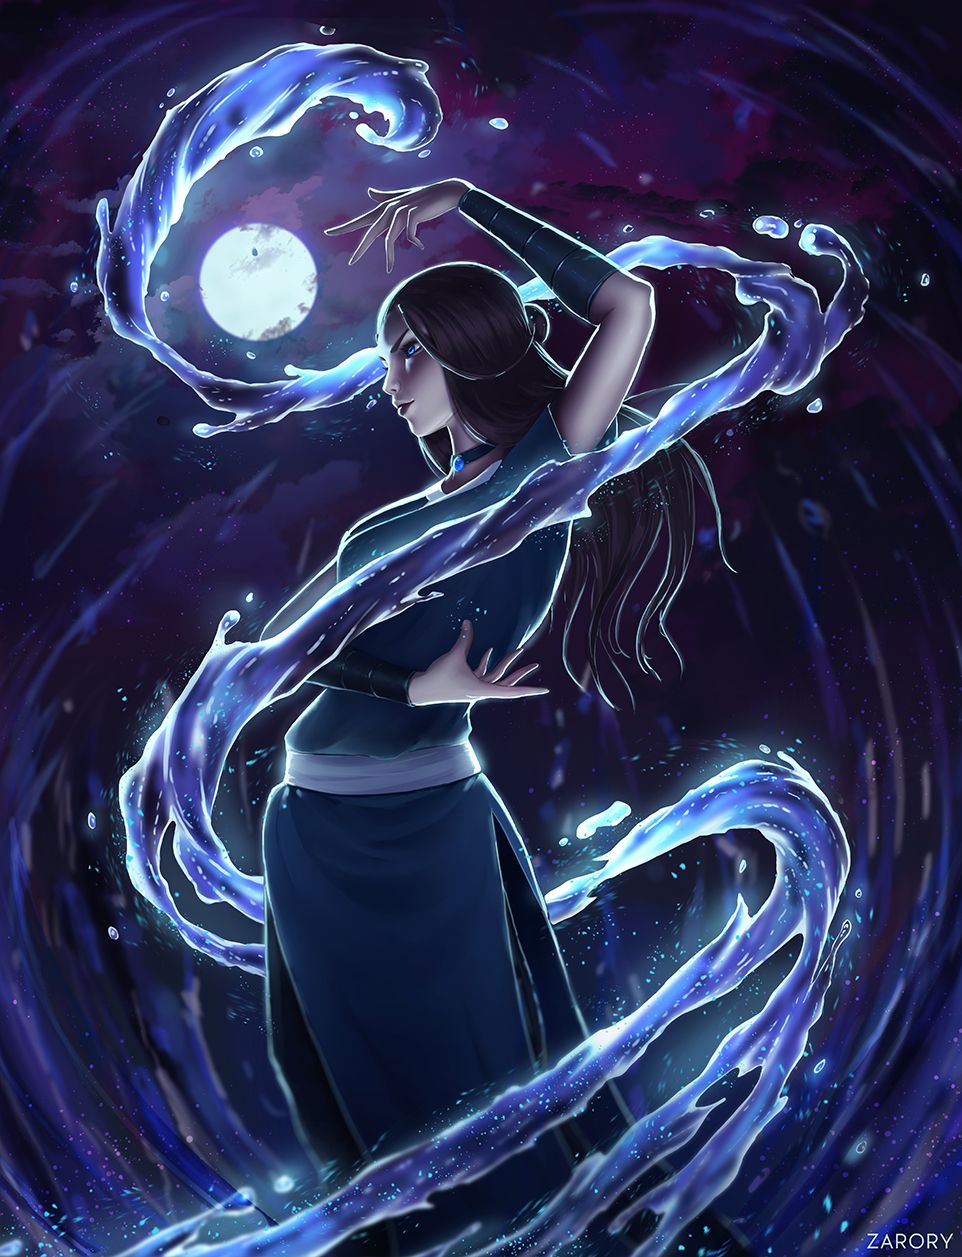 Avatar The Last Airbender 10 Katara Fan Art Pictures That You Need To See.